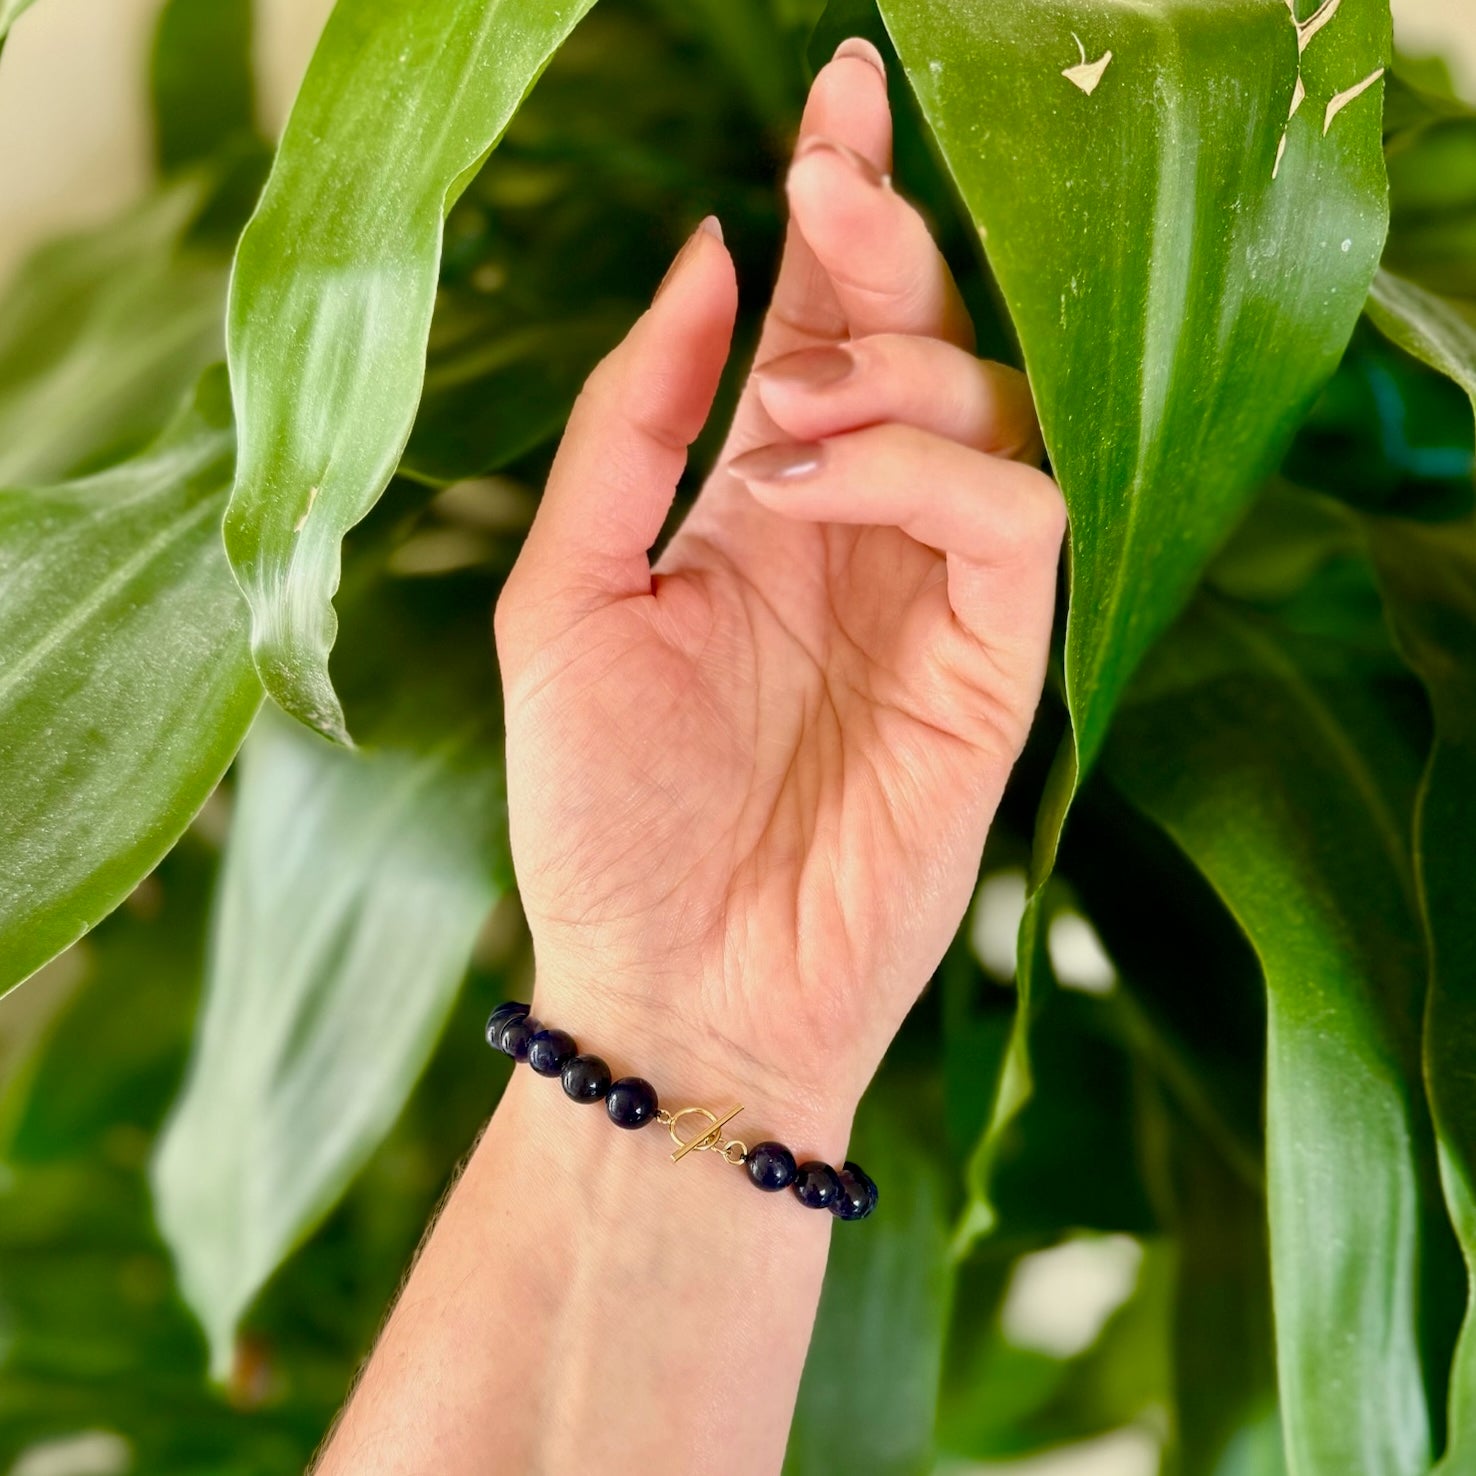 Crystal healing Indigo bracelet known for developing and clarifying your intuition